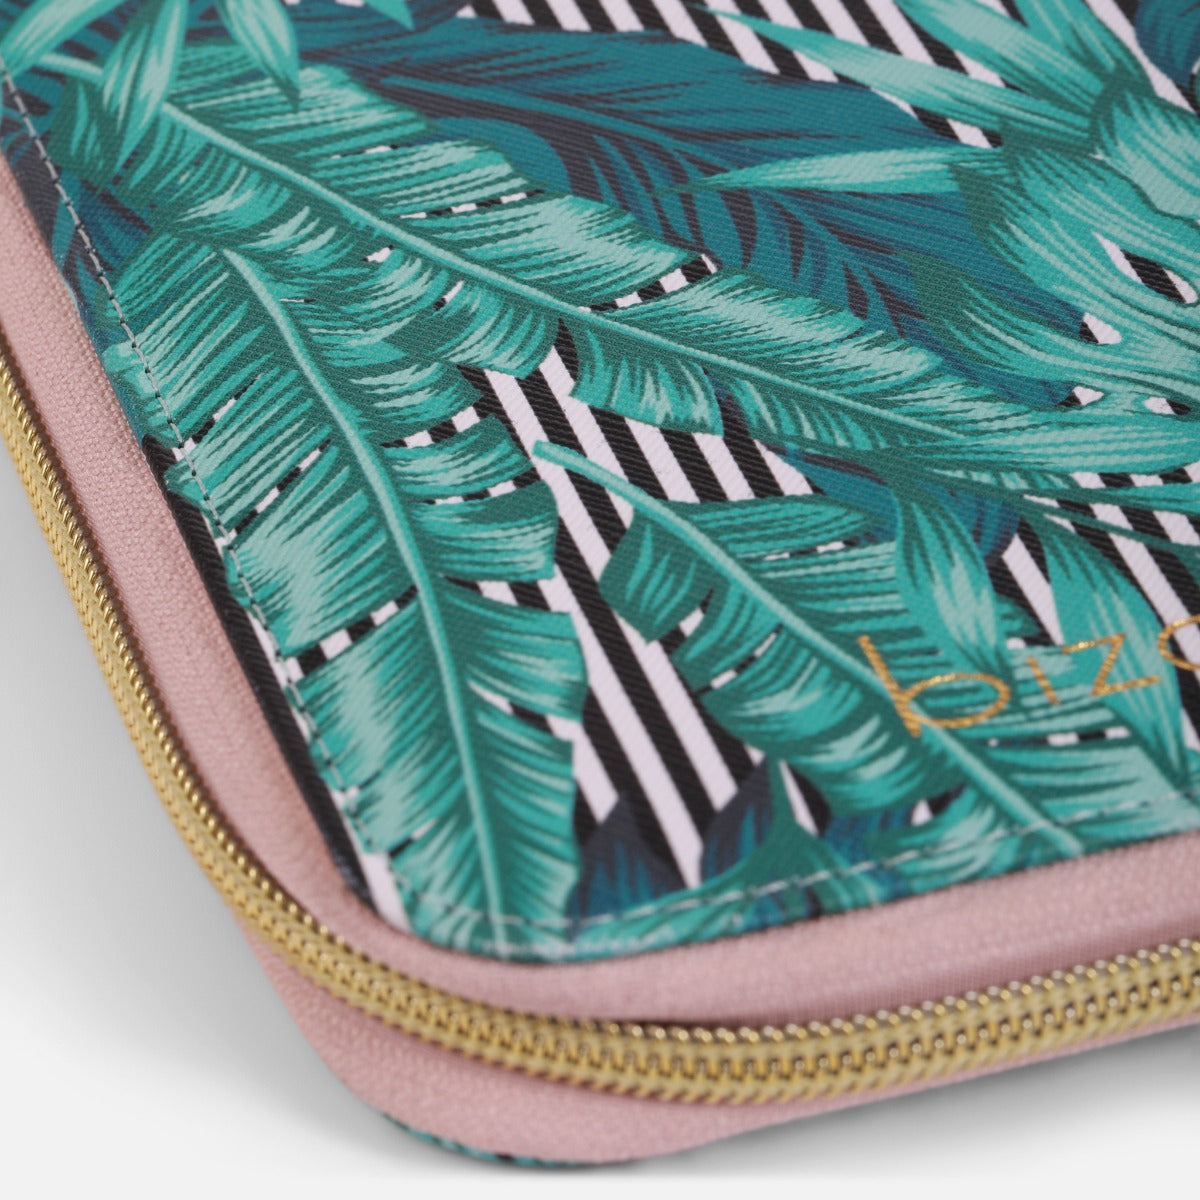 Family passport case with tropical print